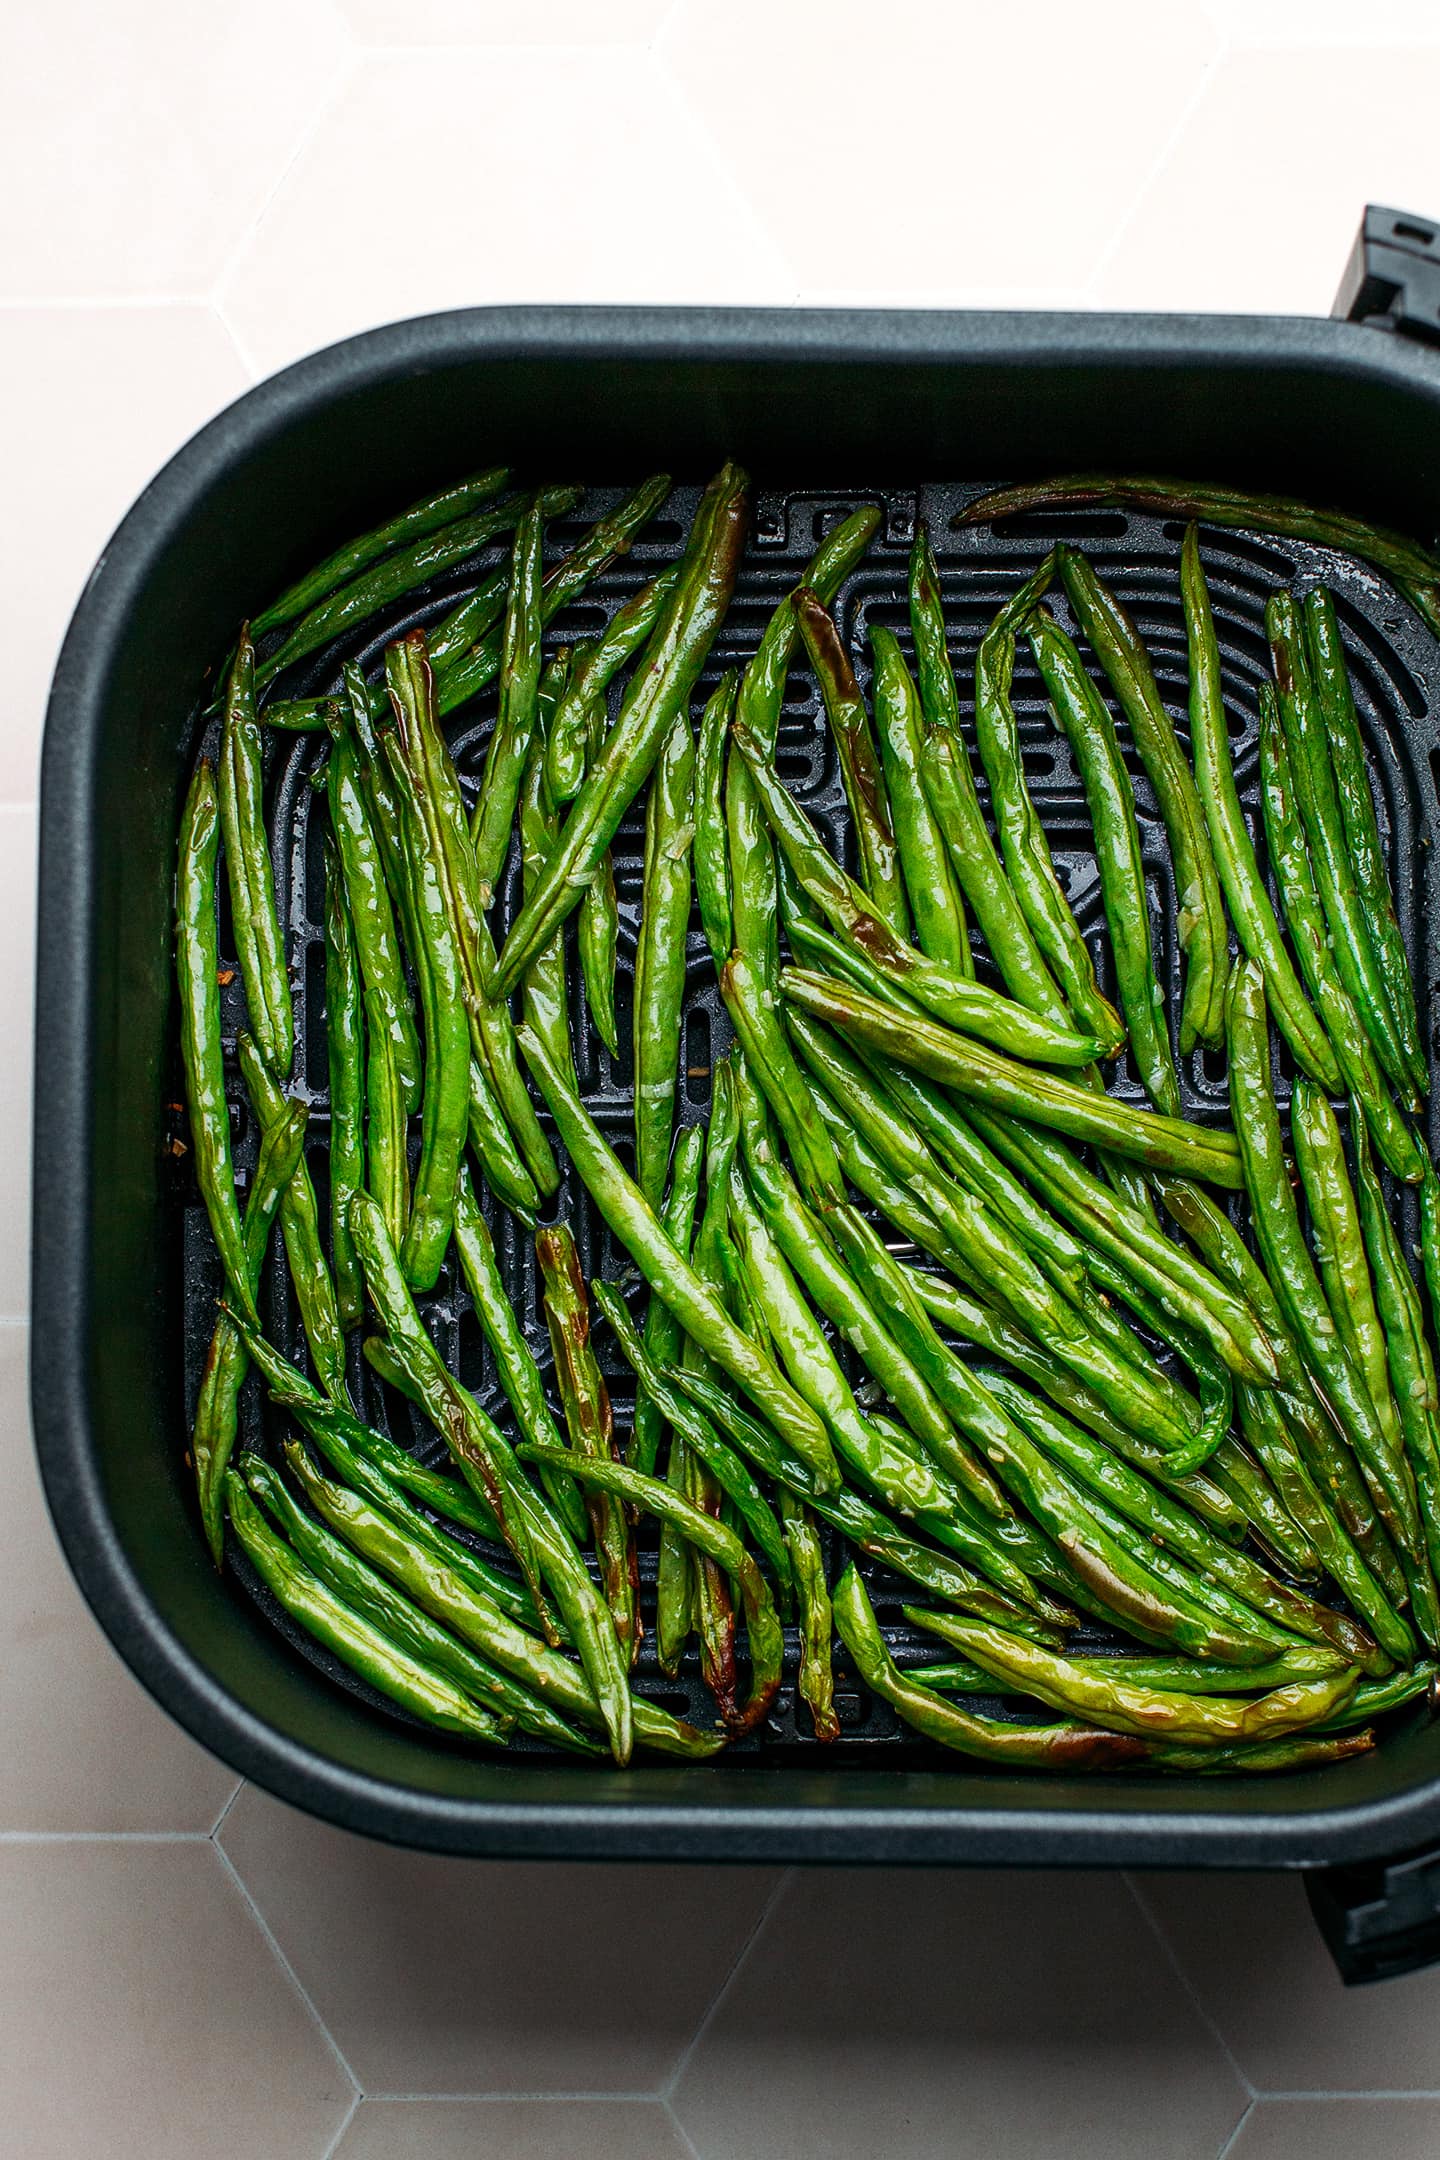 Cooked green beans in an air fryer basket.